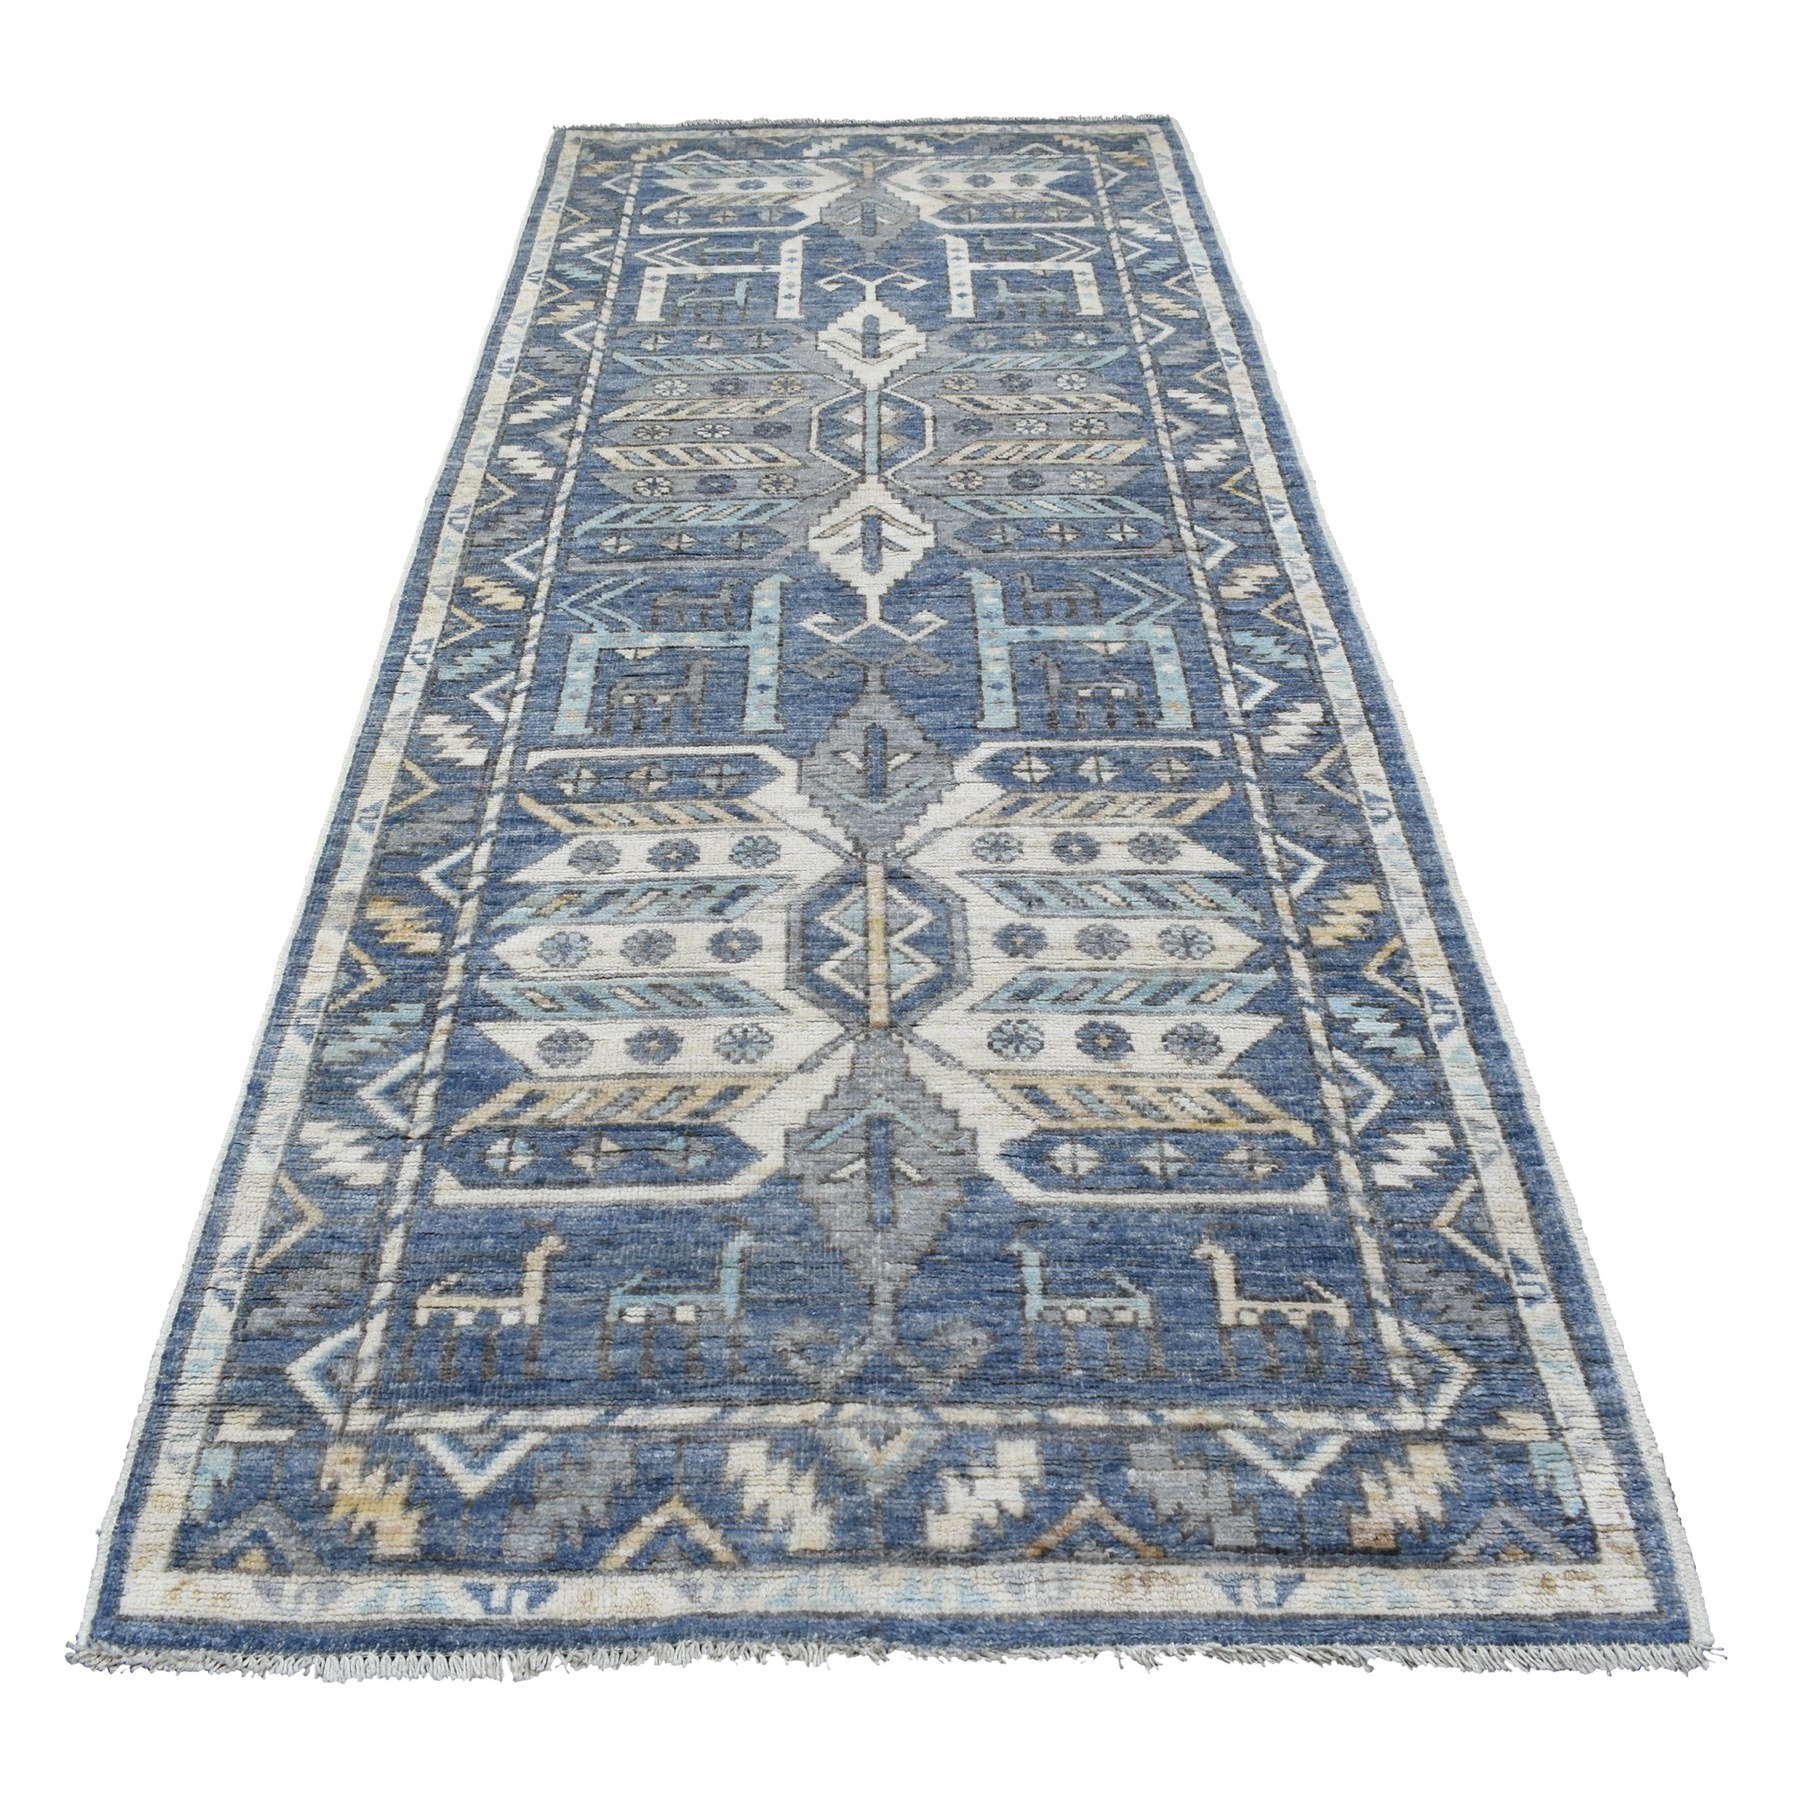 4'3"x10'1" Denim Blue Village Inspired Anatolian with Ancient Animal Figurines Pure Wool Hand Woven Oriental Runner Rug 